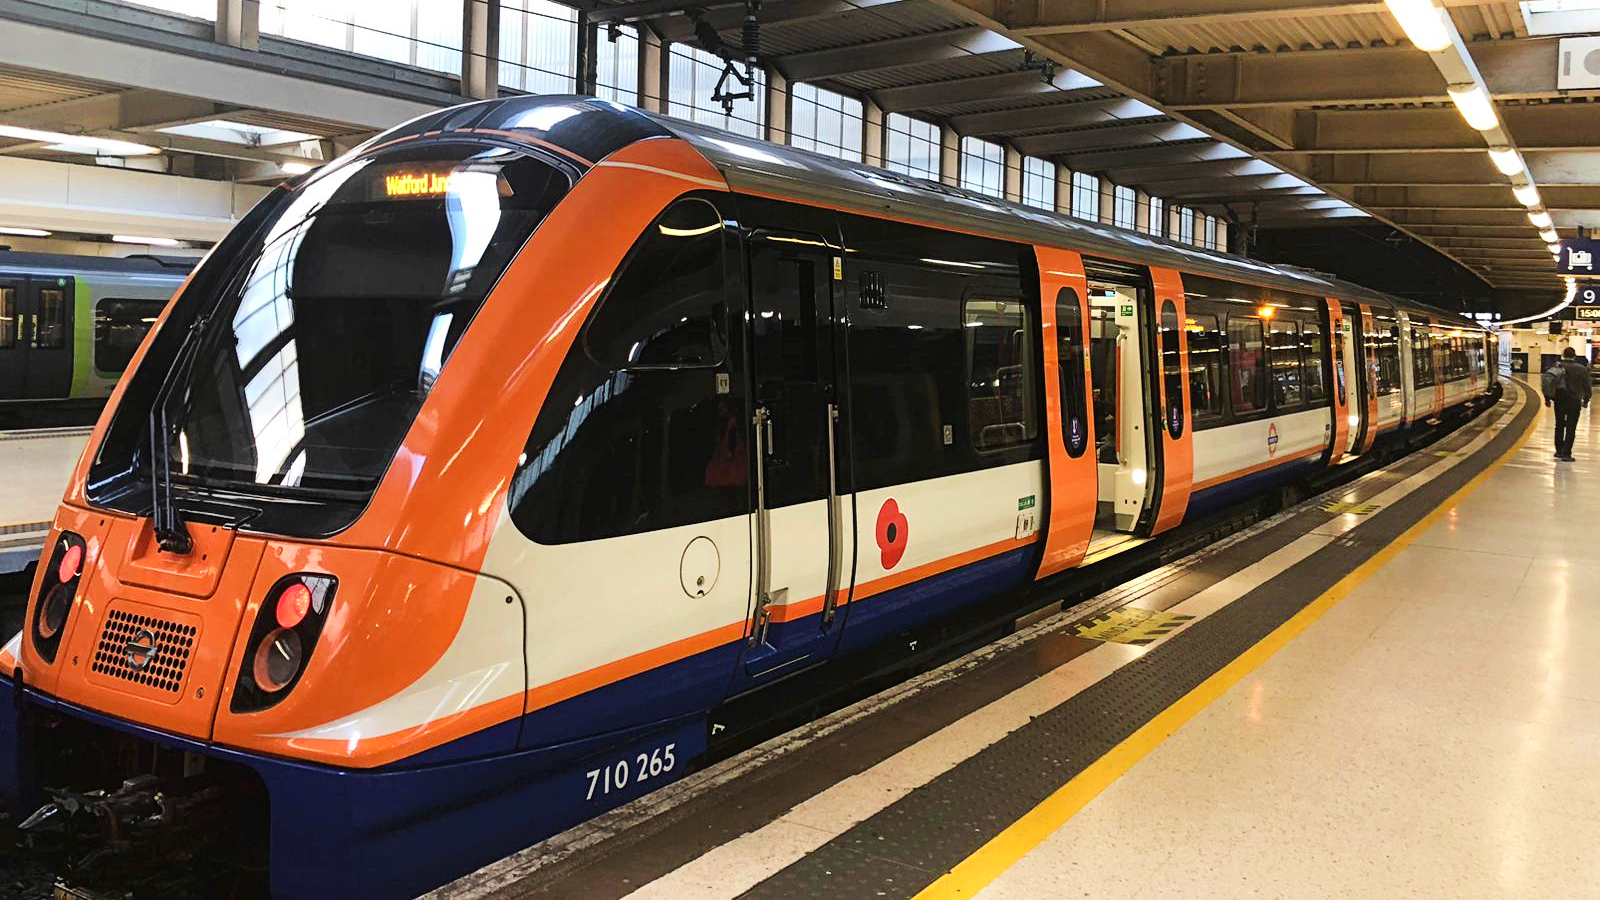 Network Rail to Upgrade Bakerloo and London Overground Lines